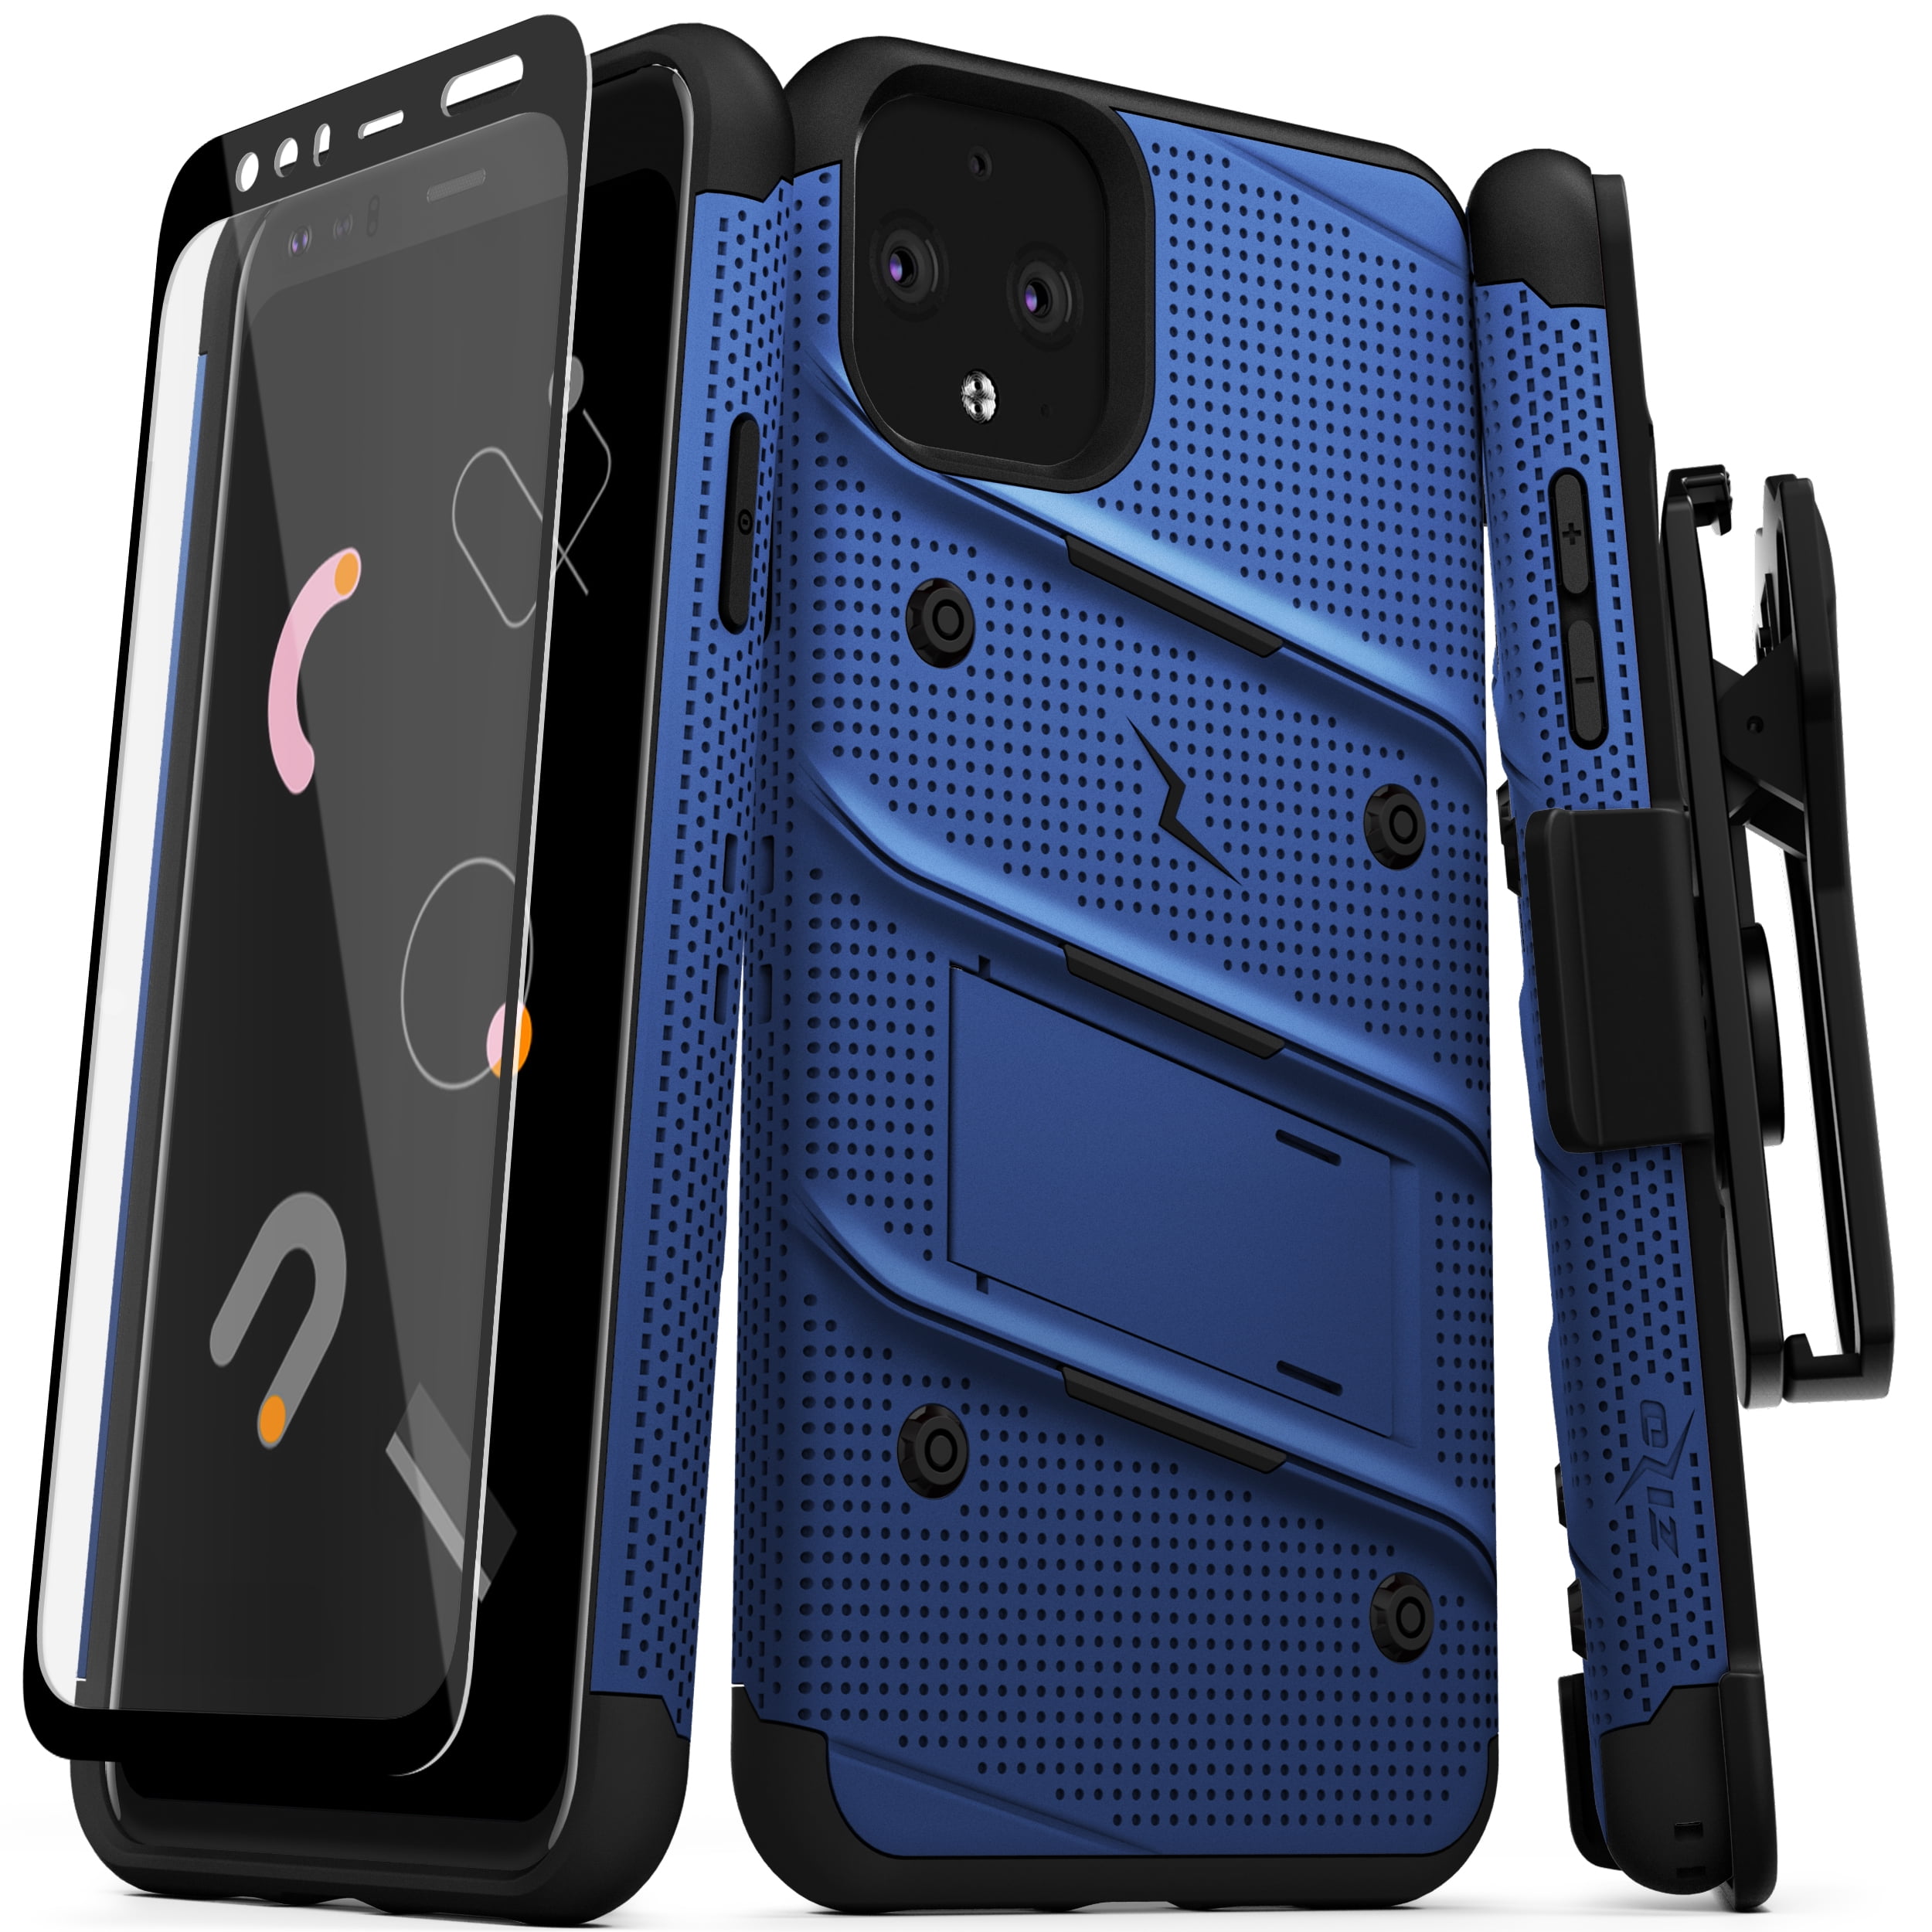 Heavy-Duty Military-Grade Drop Protection w/Kickstand Included Belt Clip Holster Tempered Glass Lanyard Black/Red ZIZO Bolt Series for Samsung Galaxy A10e Case 